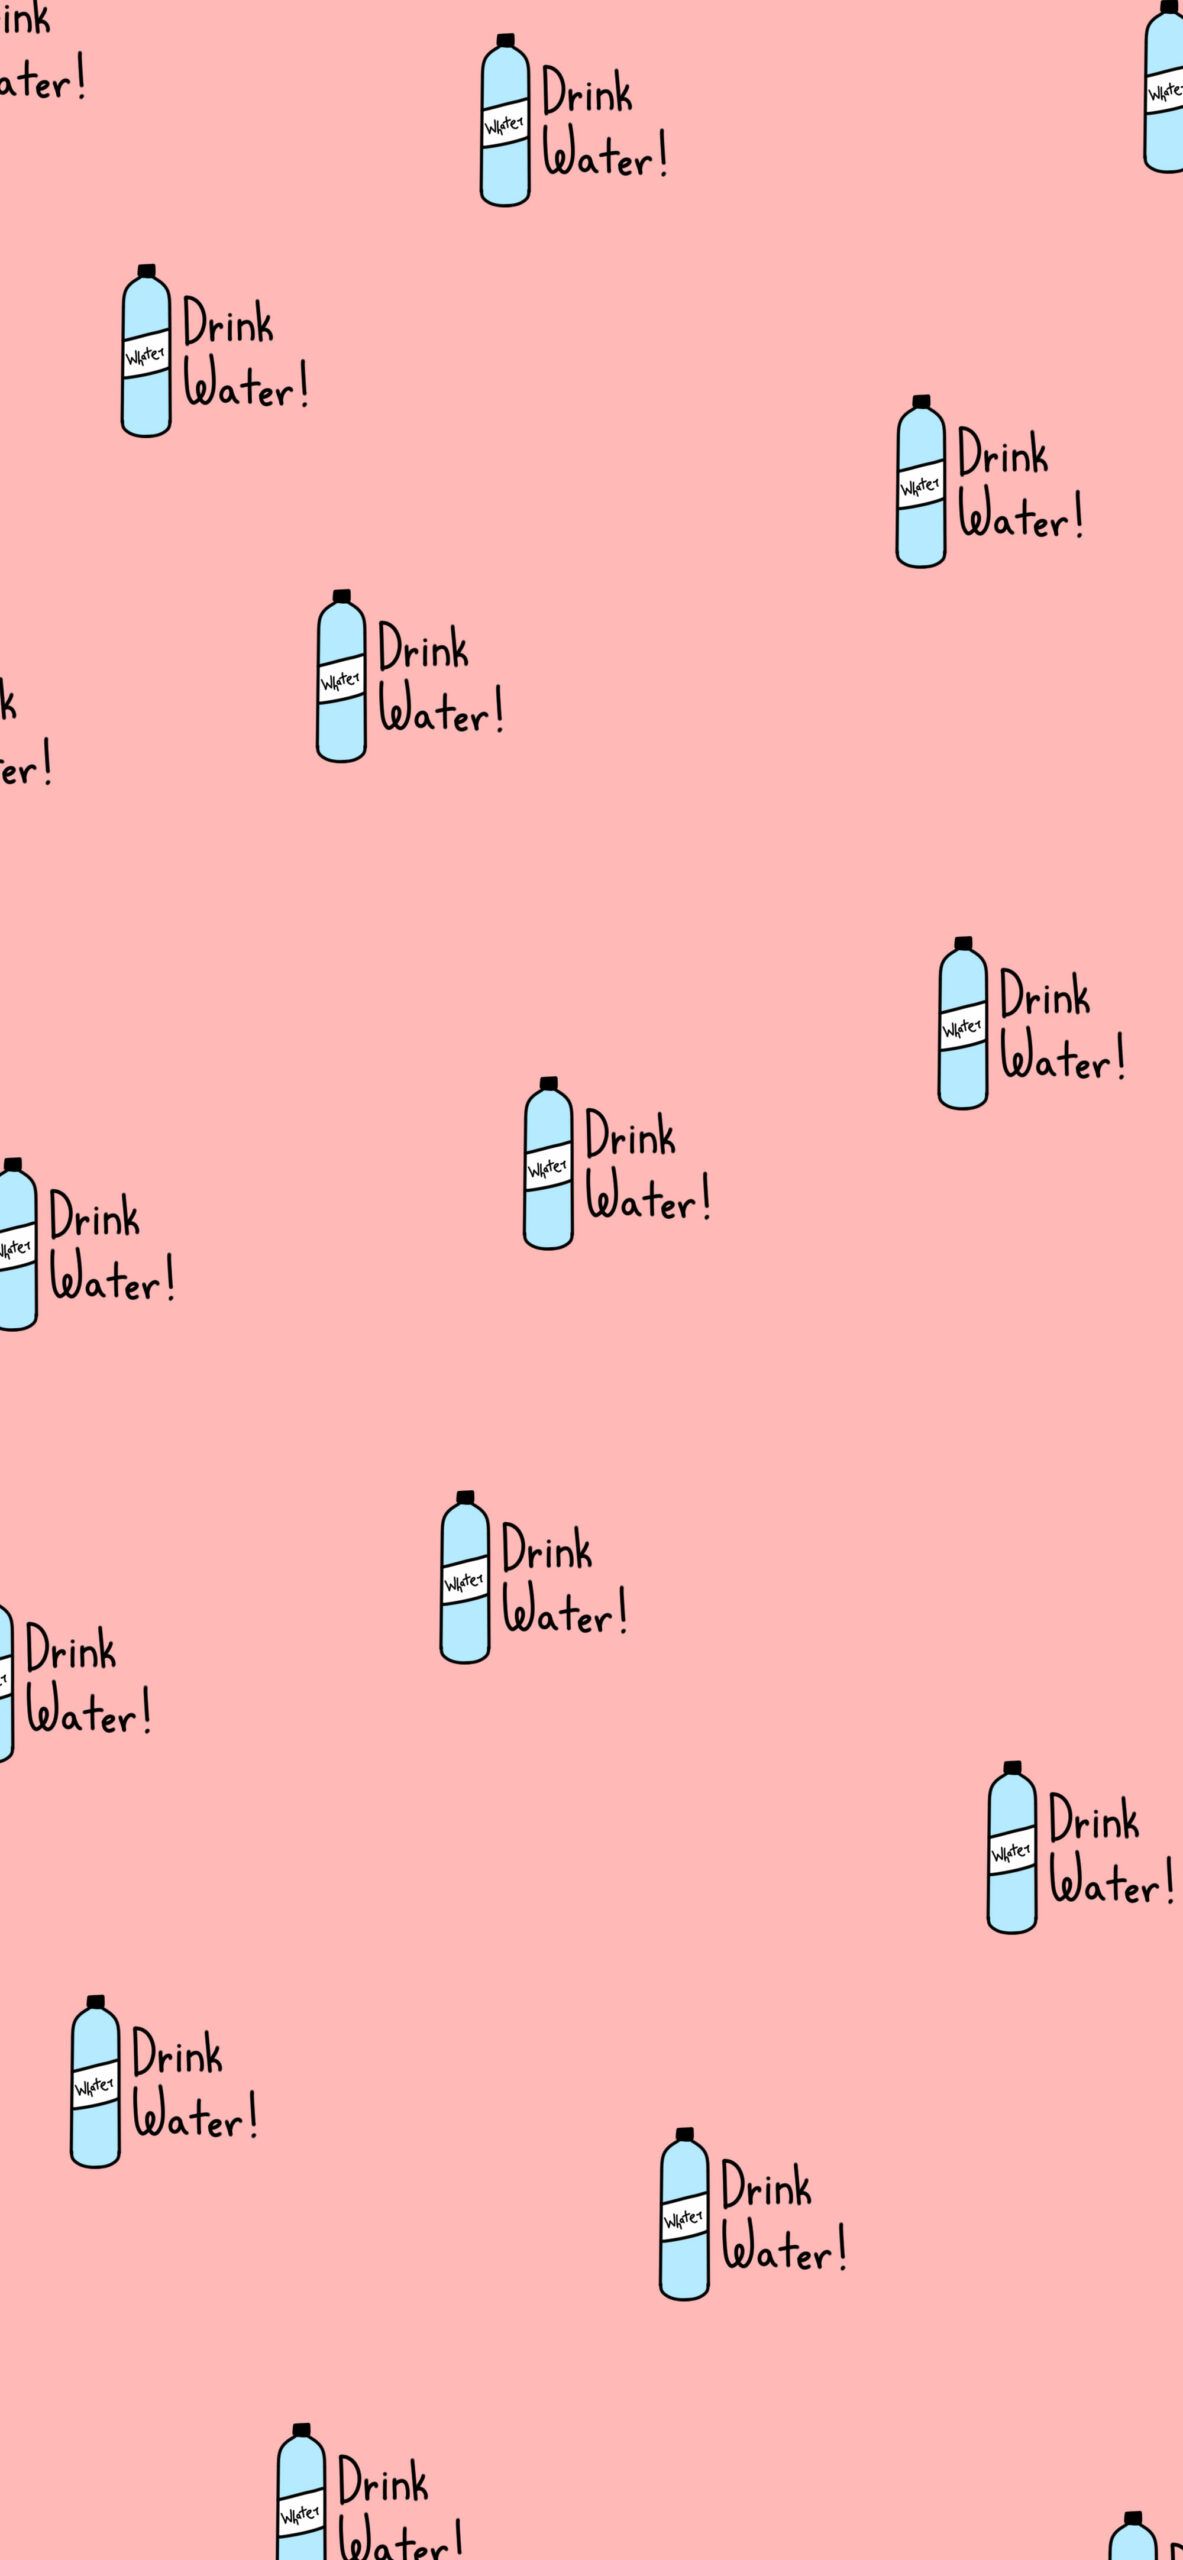 A pink background with repeated images of a water bottle and the words 